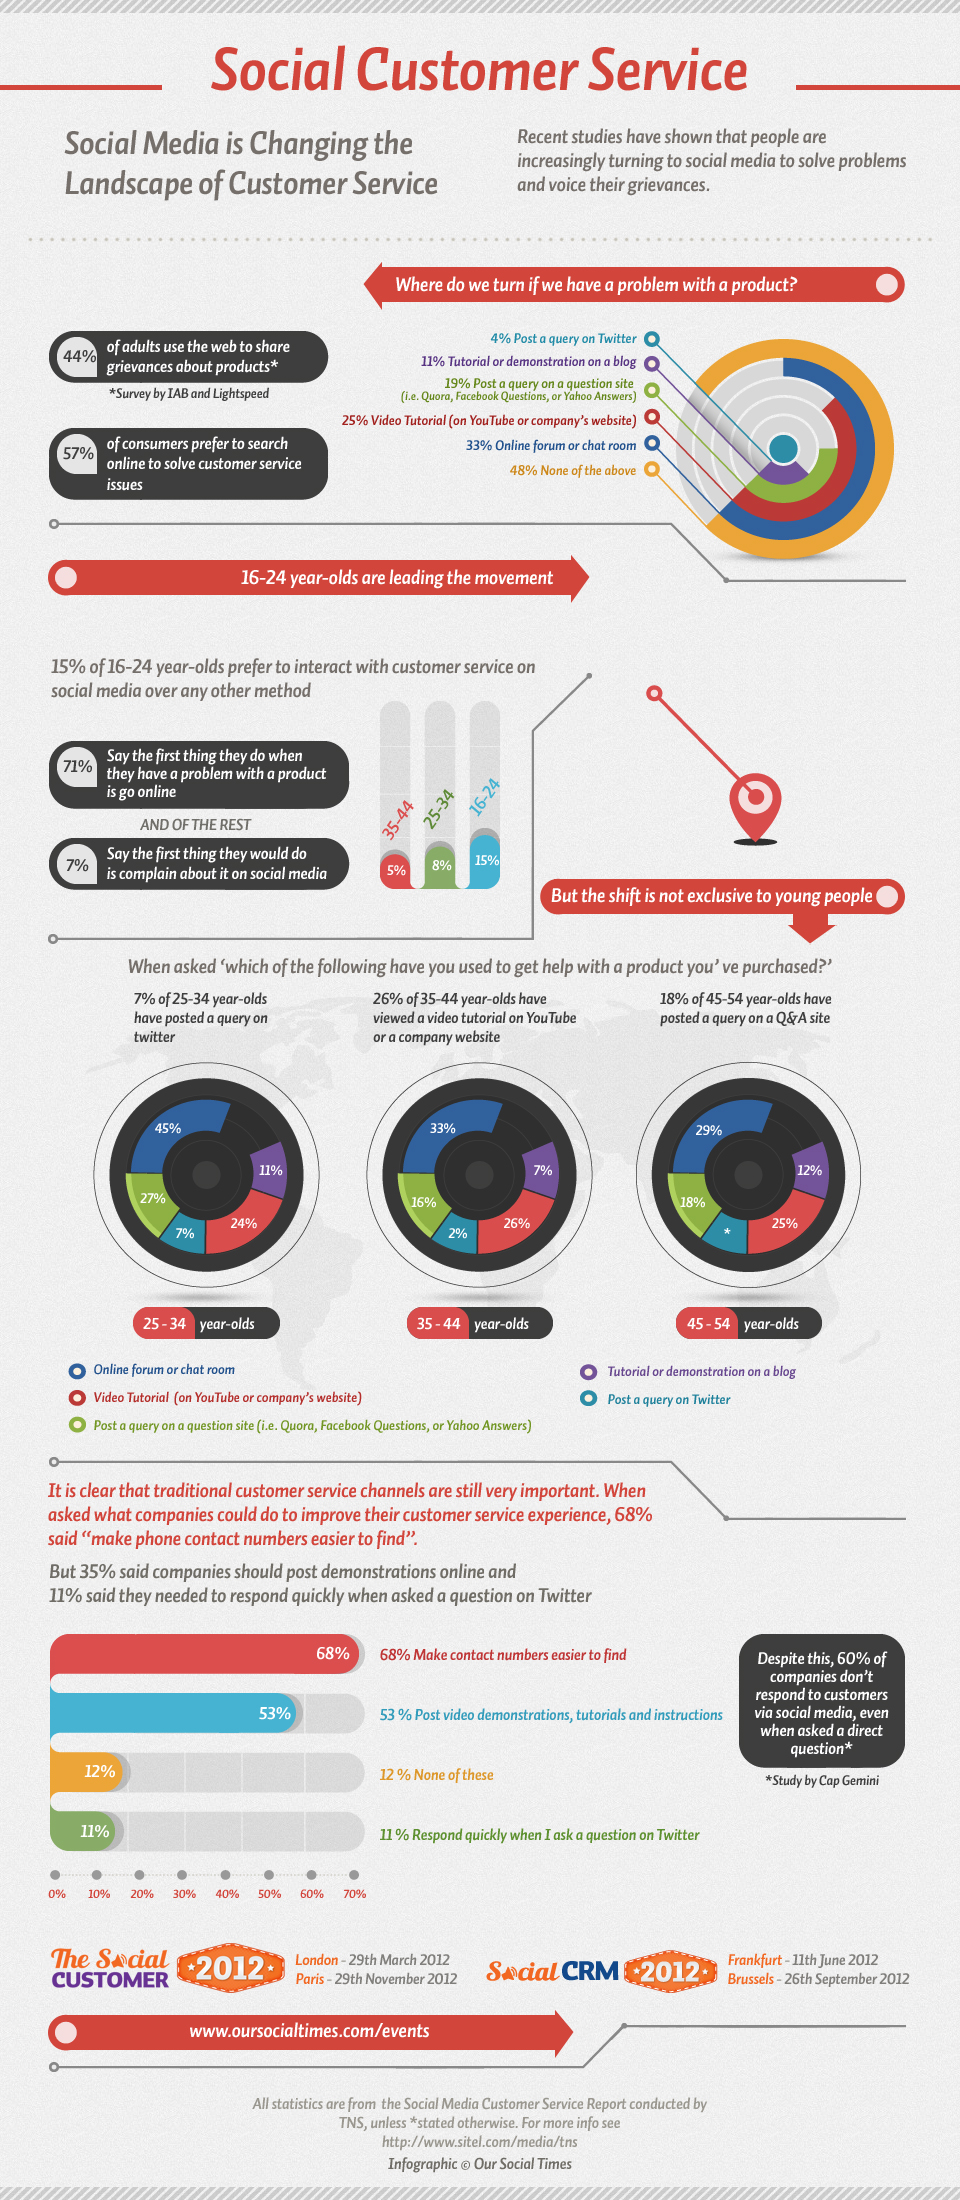 social customer service infographic 24 march How to grow your revenue through Social Customer Support